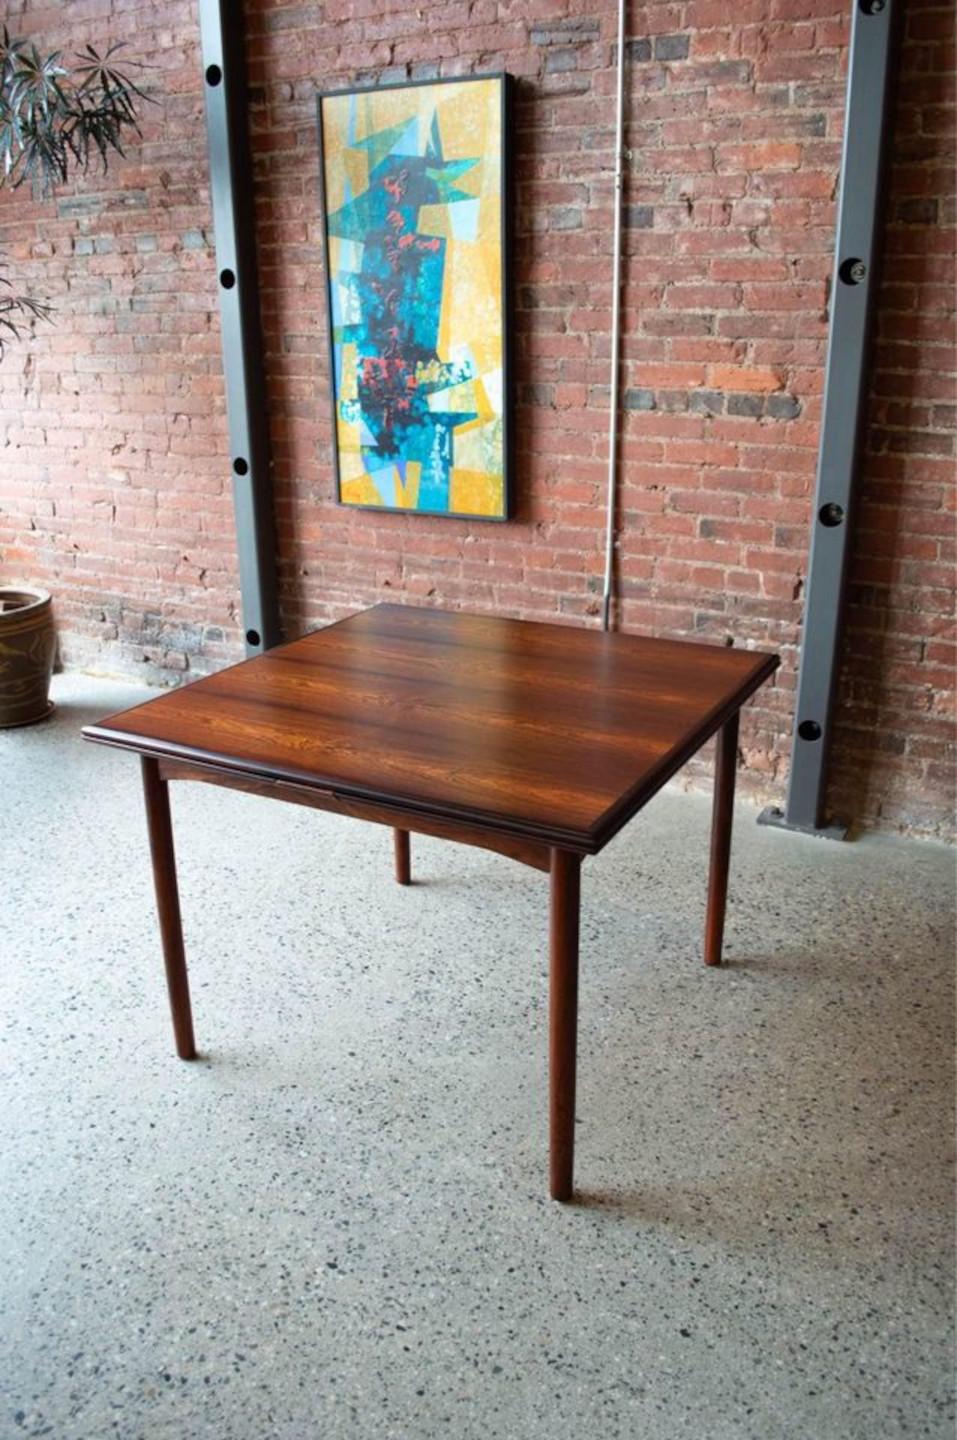 Fresh from restoration, we are pleased to offer an exquisite dining table crafted from beautifully figured Brazilian rosewood. Made in Denmark in the 1960s, this piece features a draw leaf mechanism whereby the leaves are self-stored underneath the